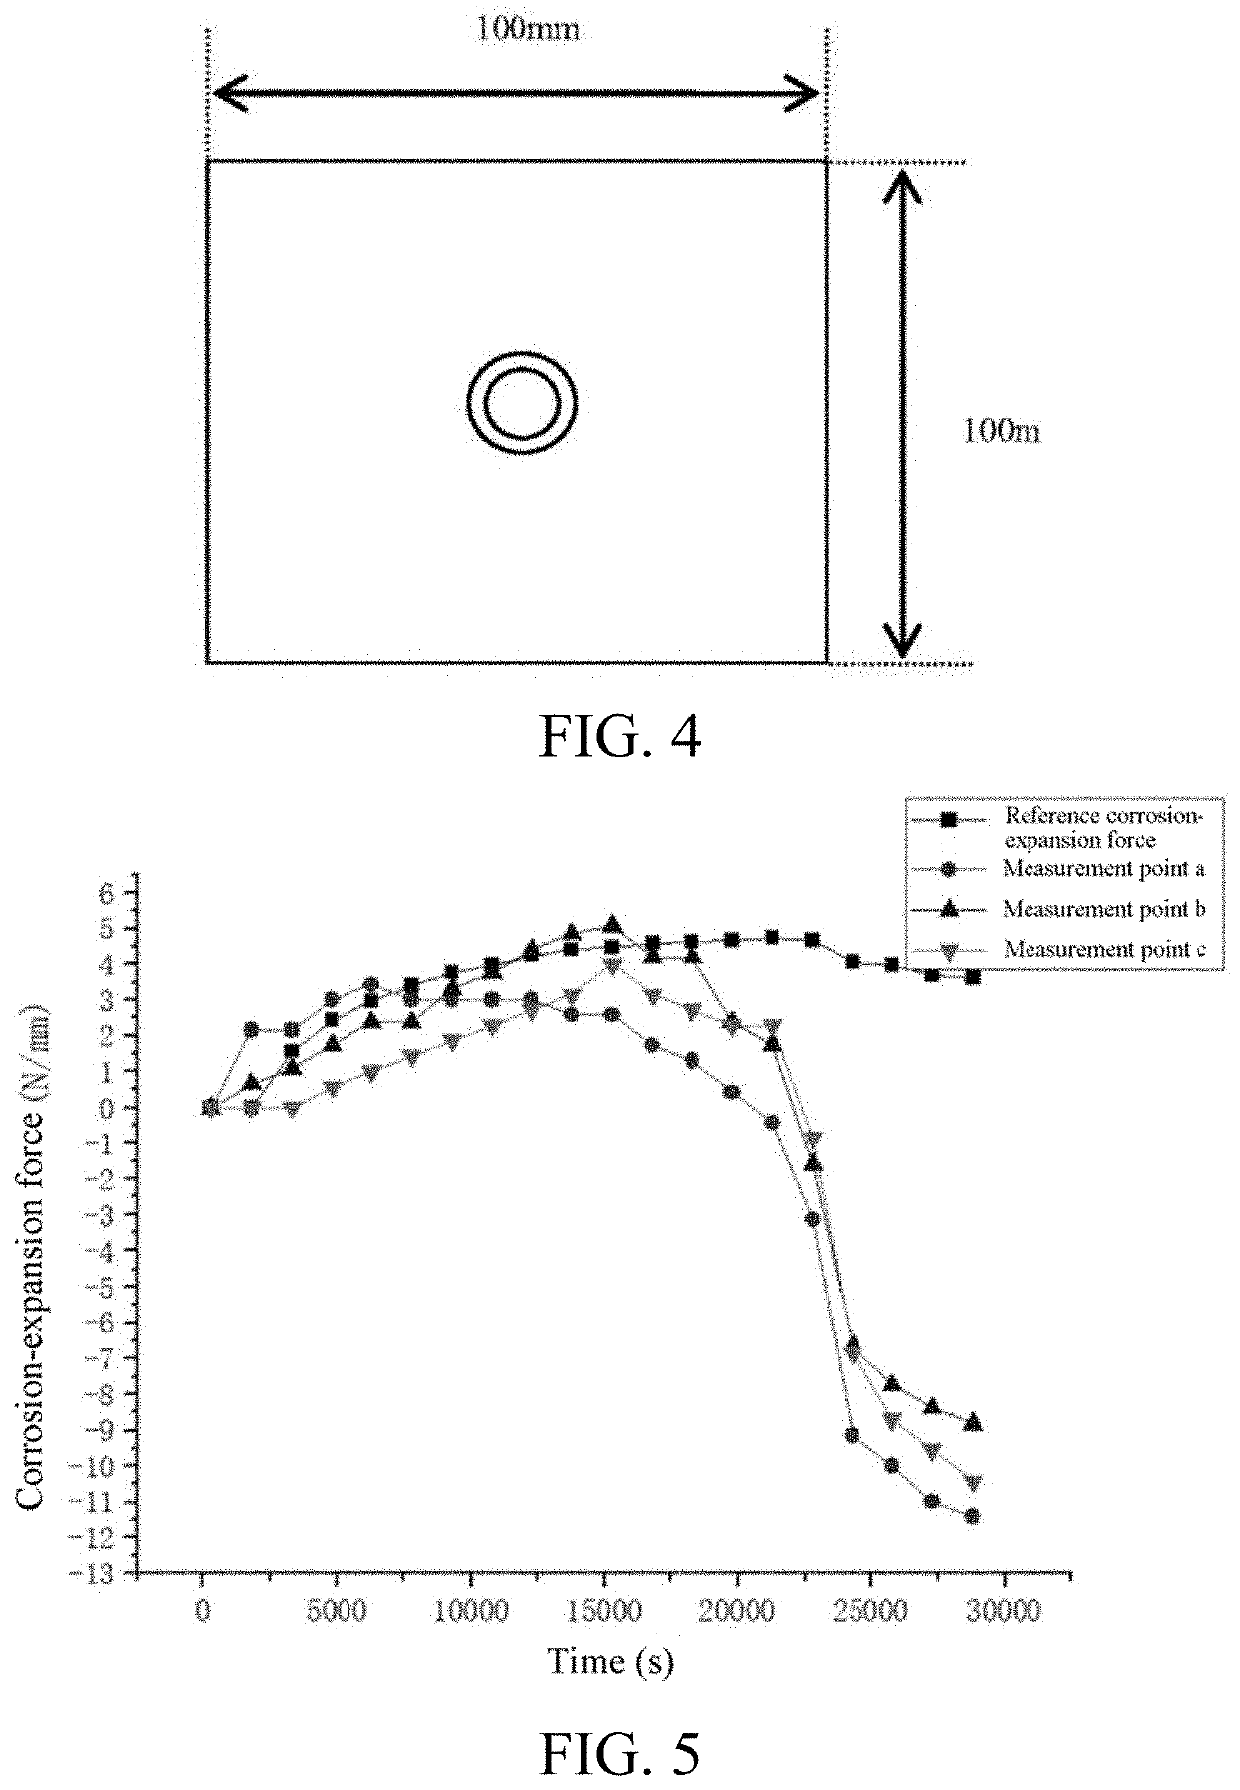 Method for measuring corrosion-expansion force during cracking of concrete due to corrosion and expansion of reinforcing steel